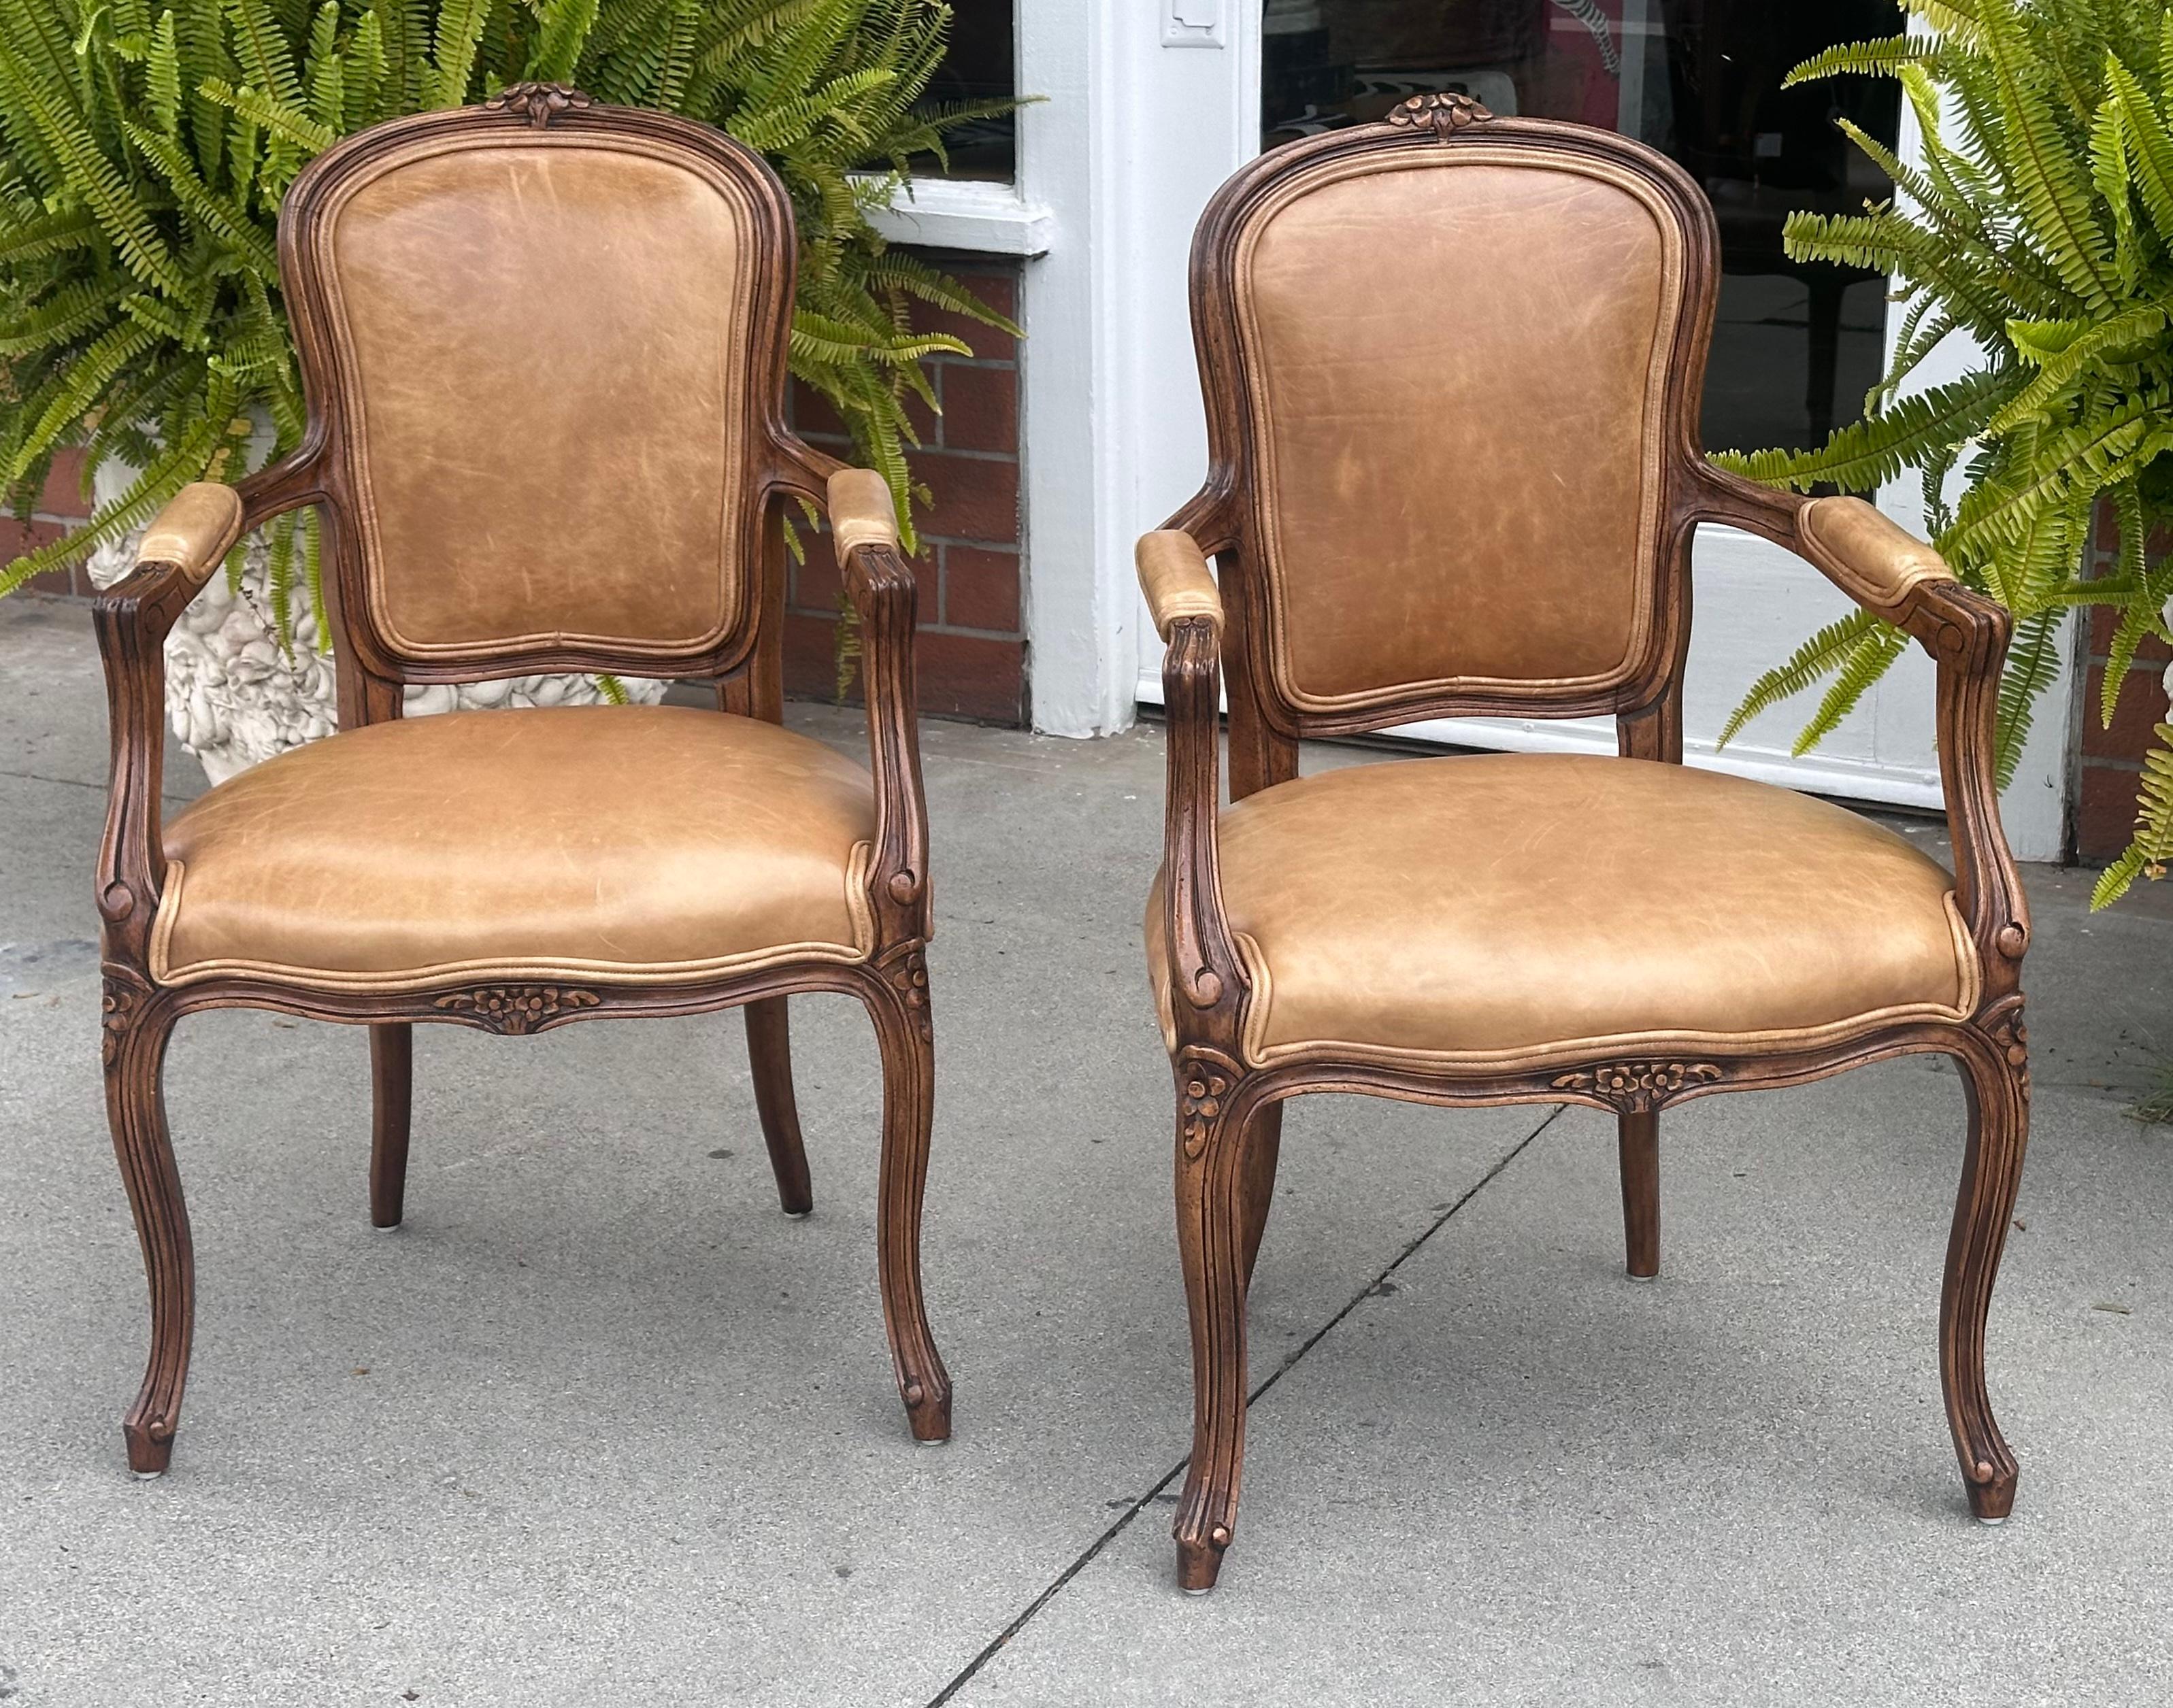 Pair of Minton Spidell French Provincial Mahogany & Leather Arm Chairs
